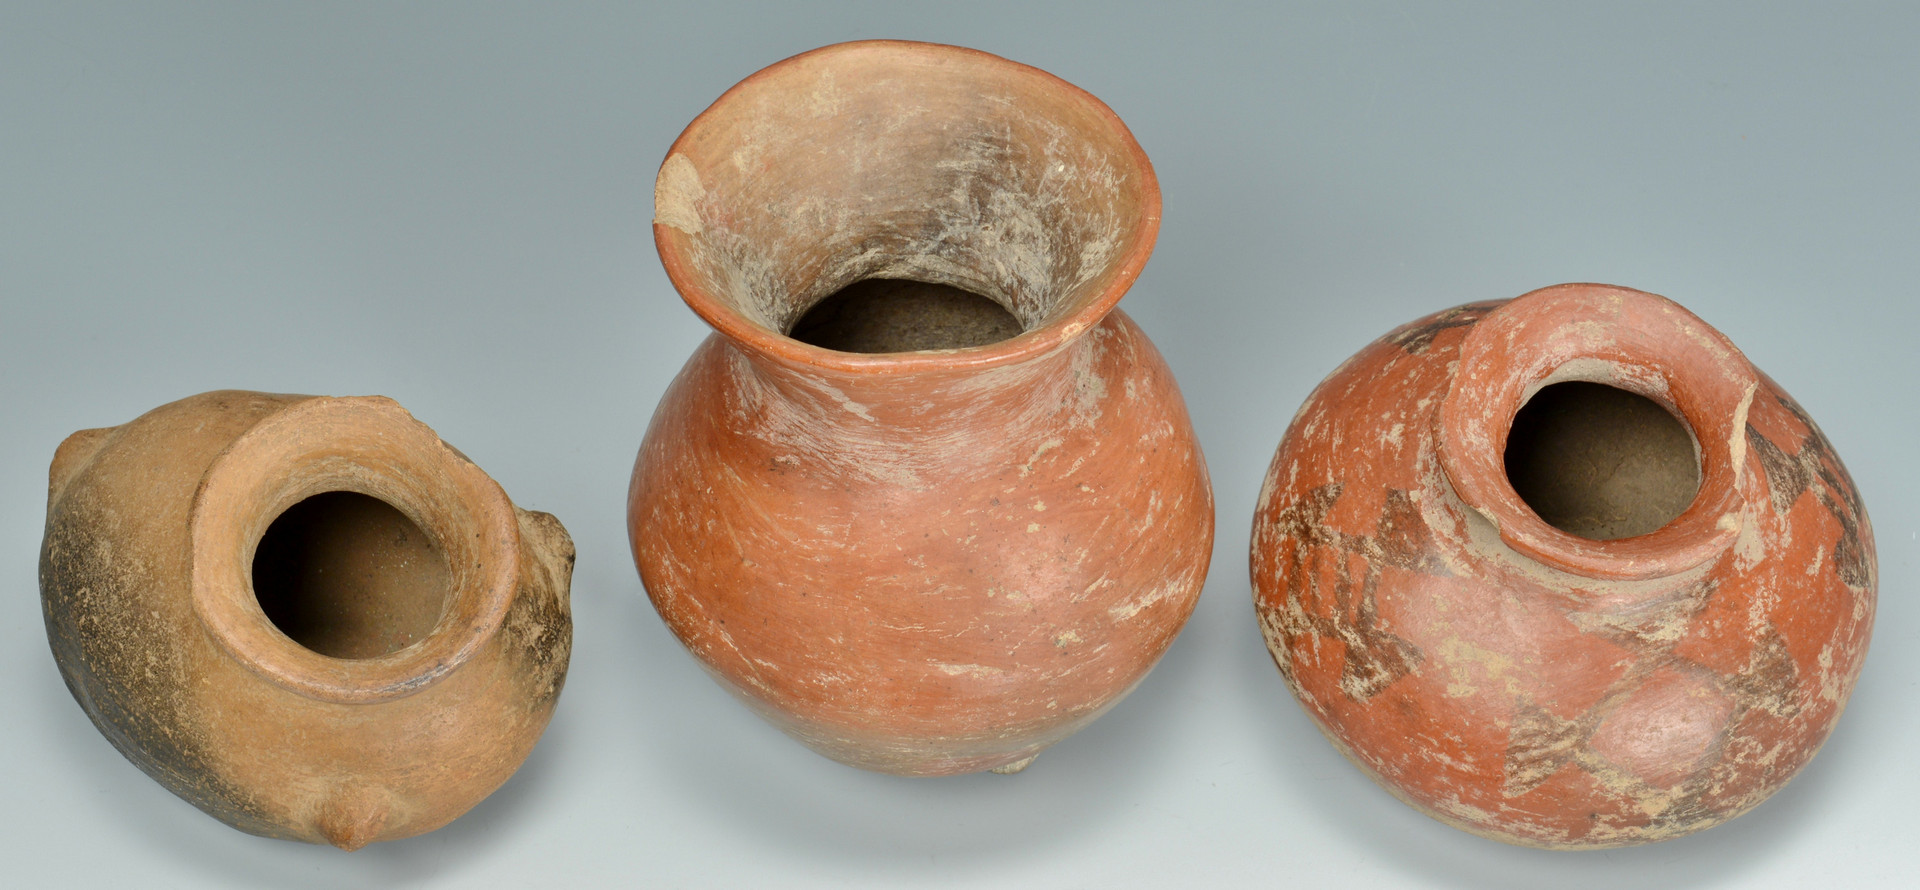 Lot 619: Group of 6 Pre Columbian vessels